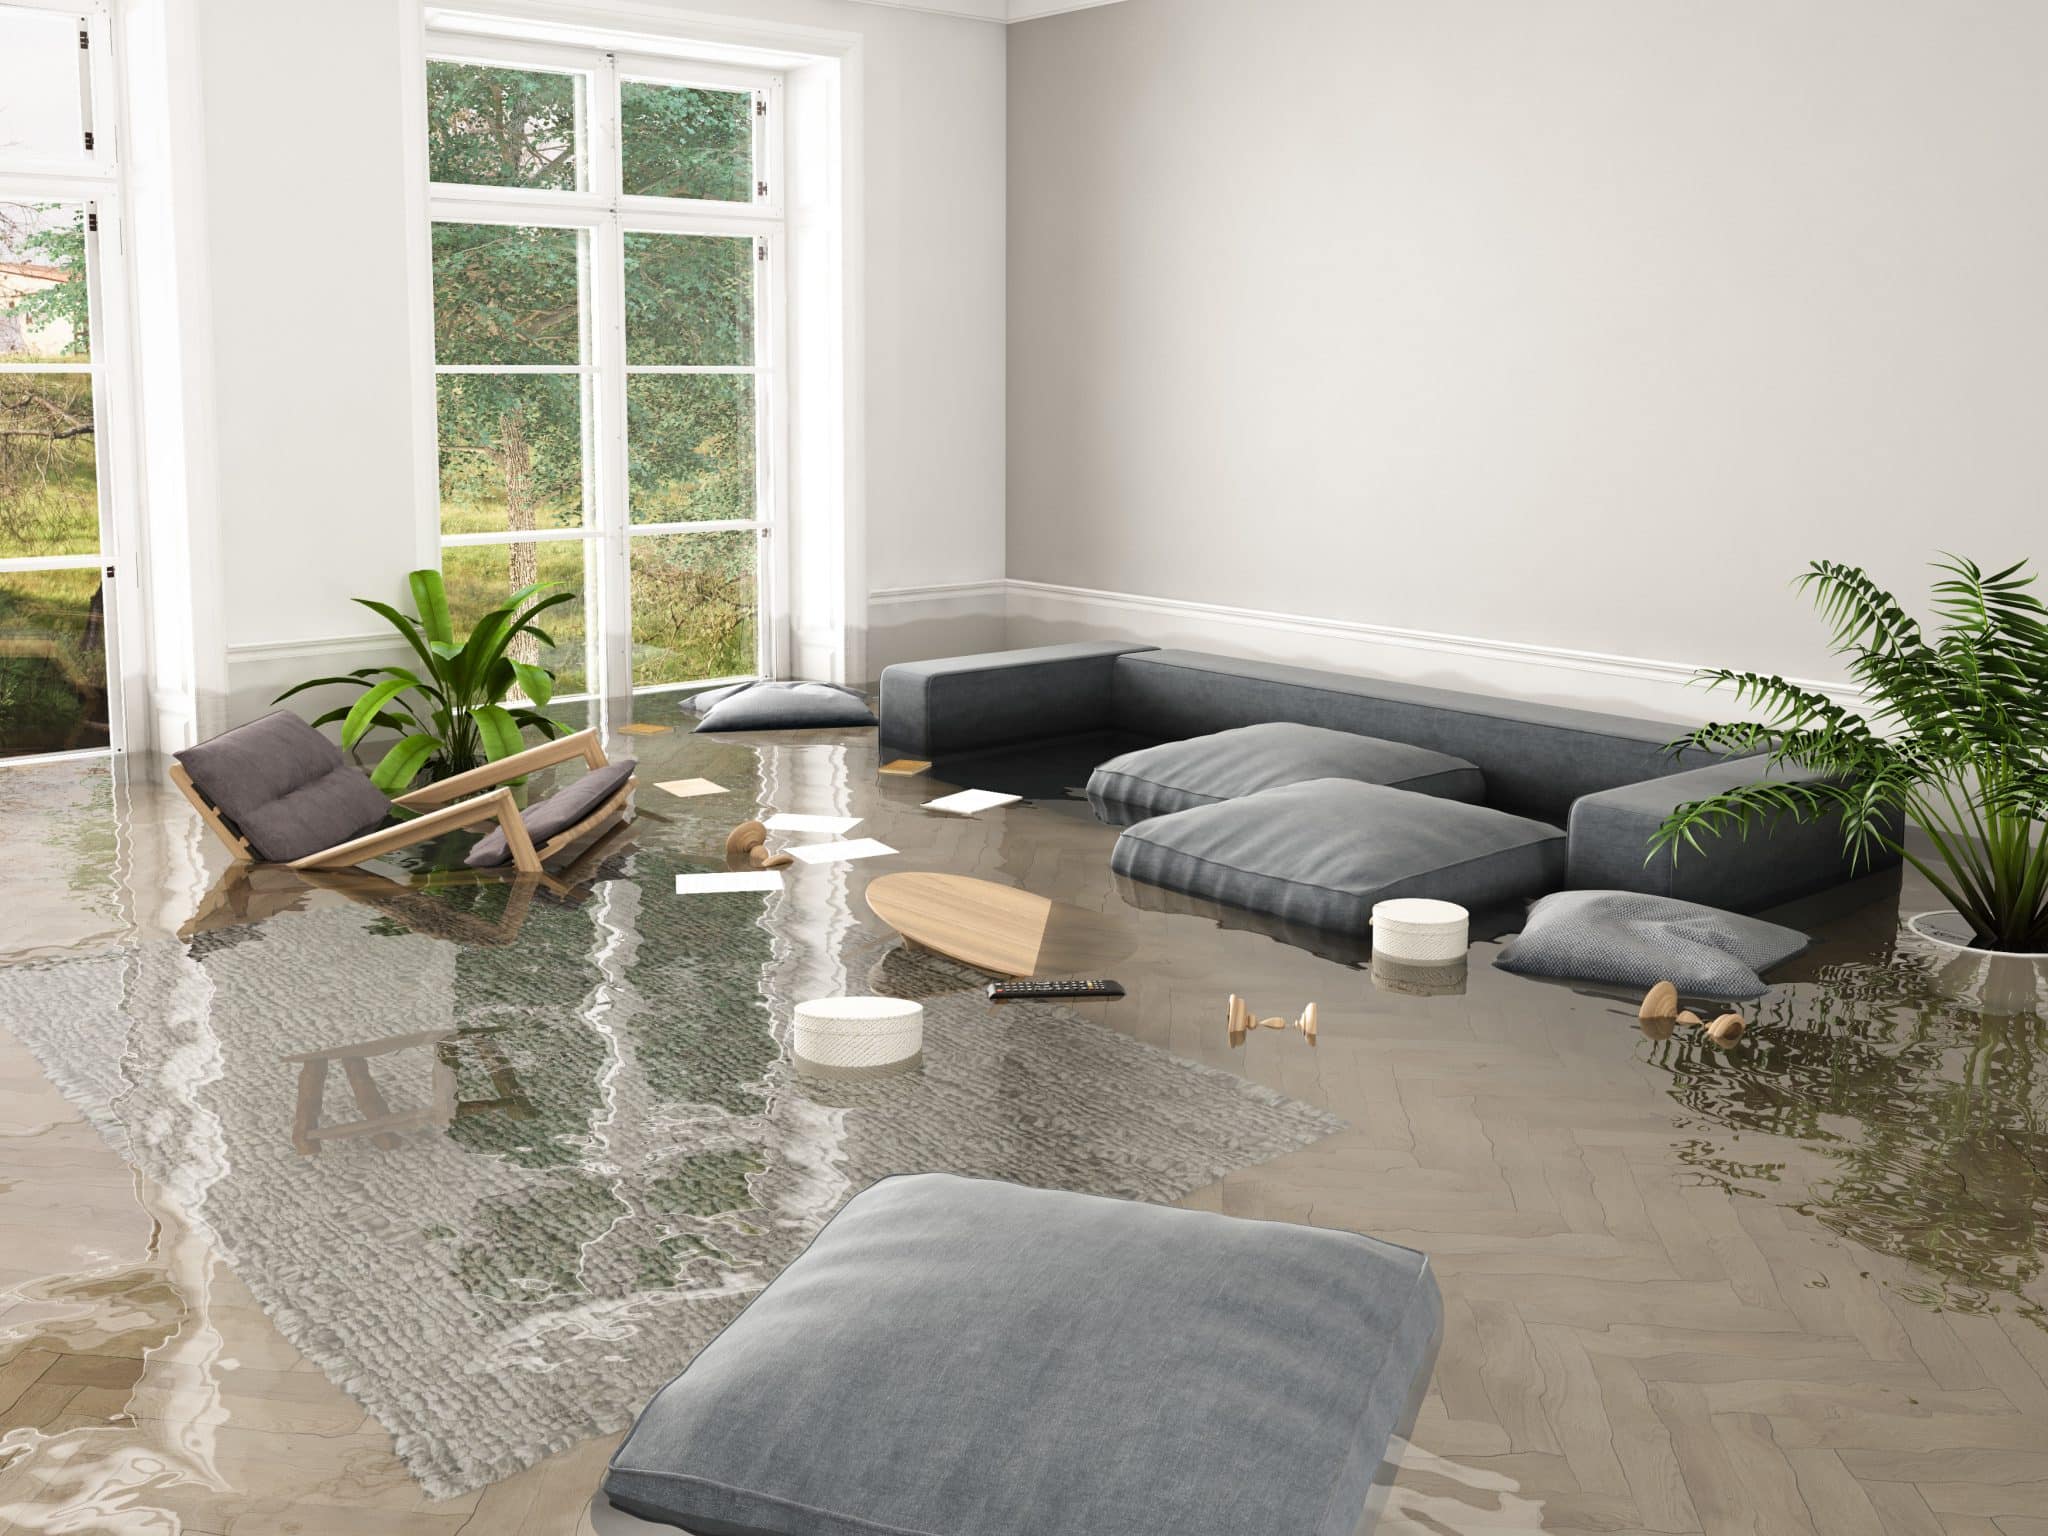 Water Damage Restoration and Mold Removal Experts in Bal Harbour Florida